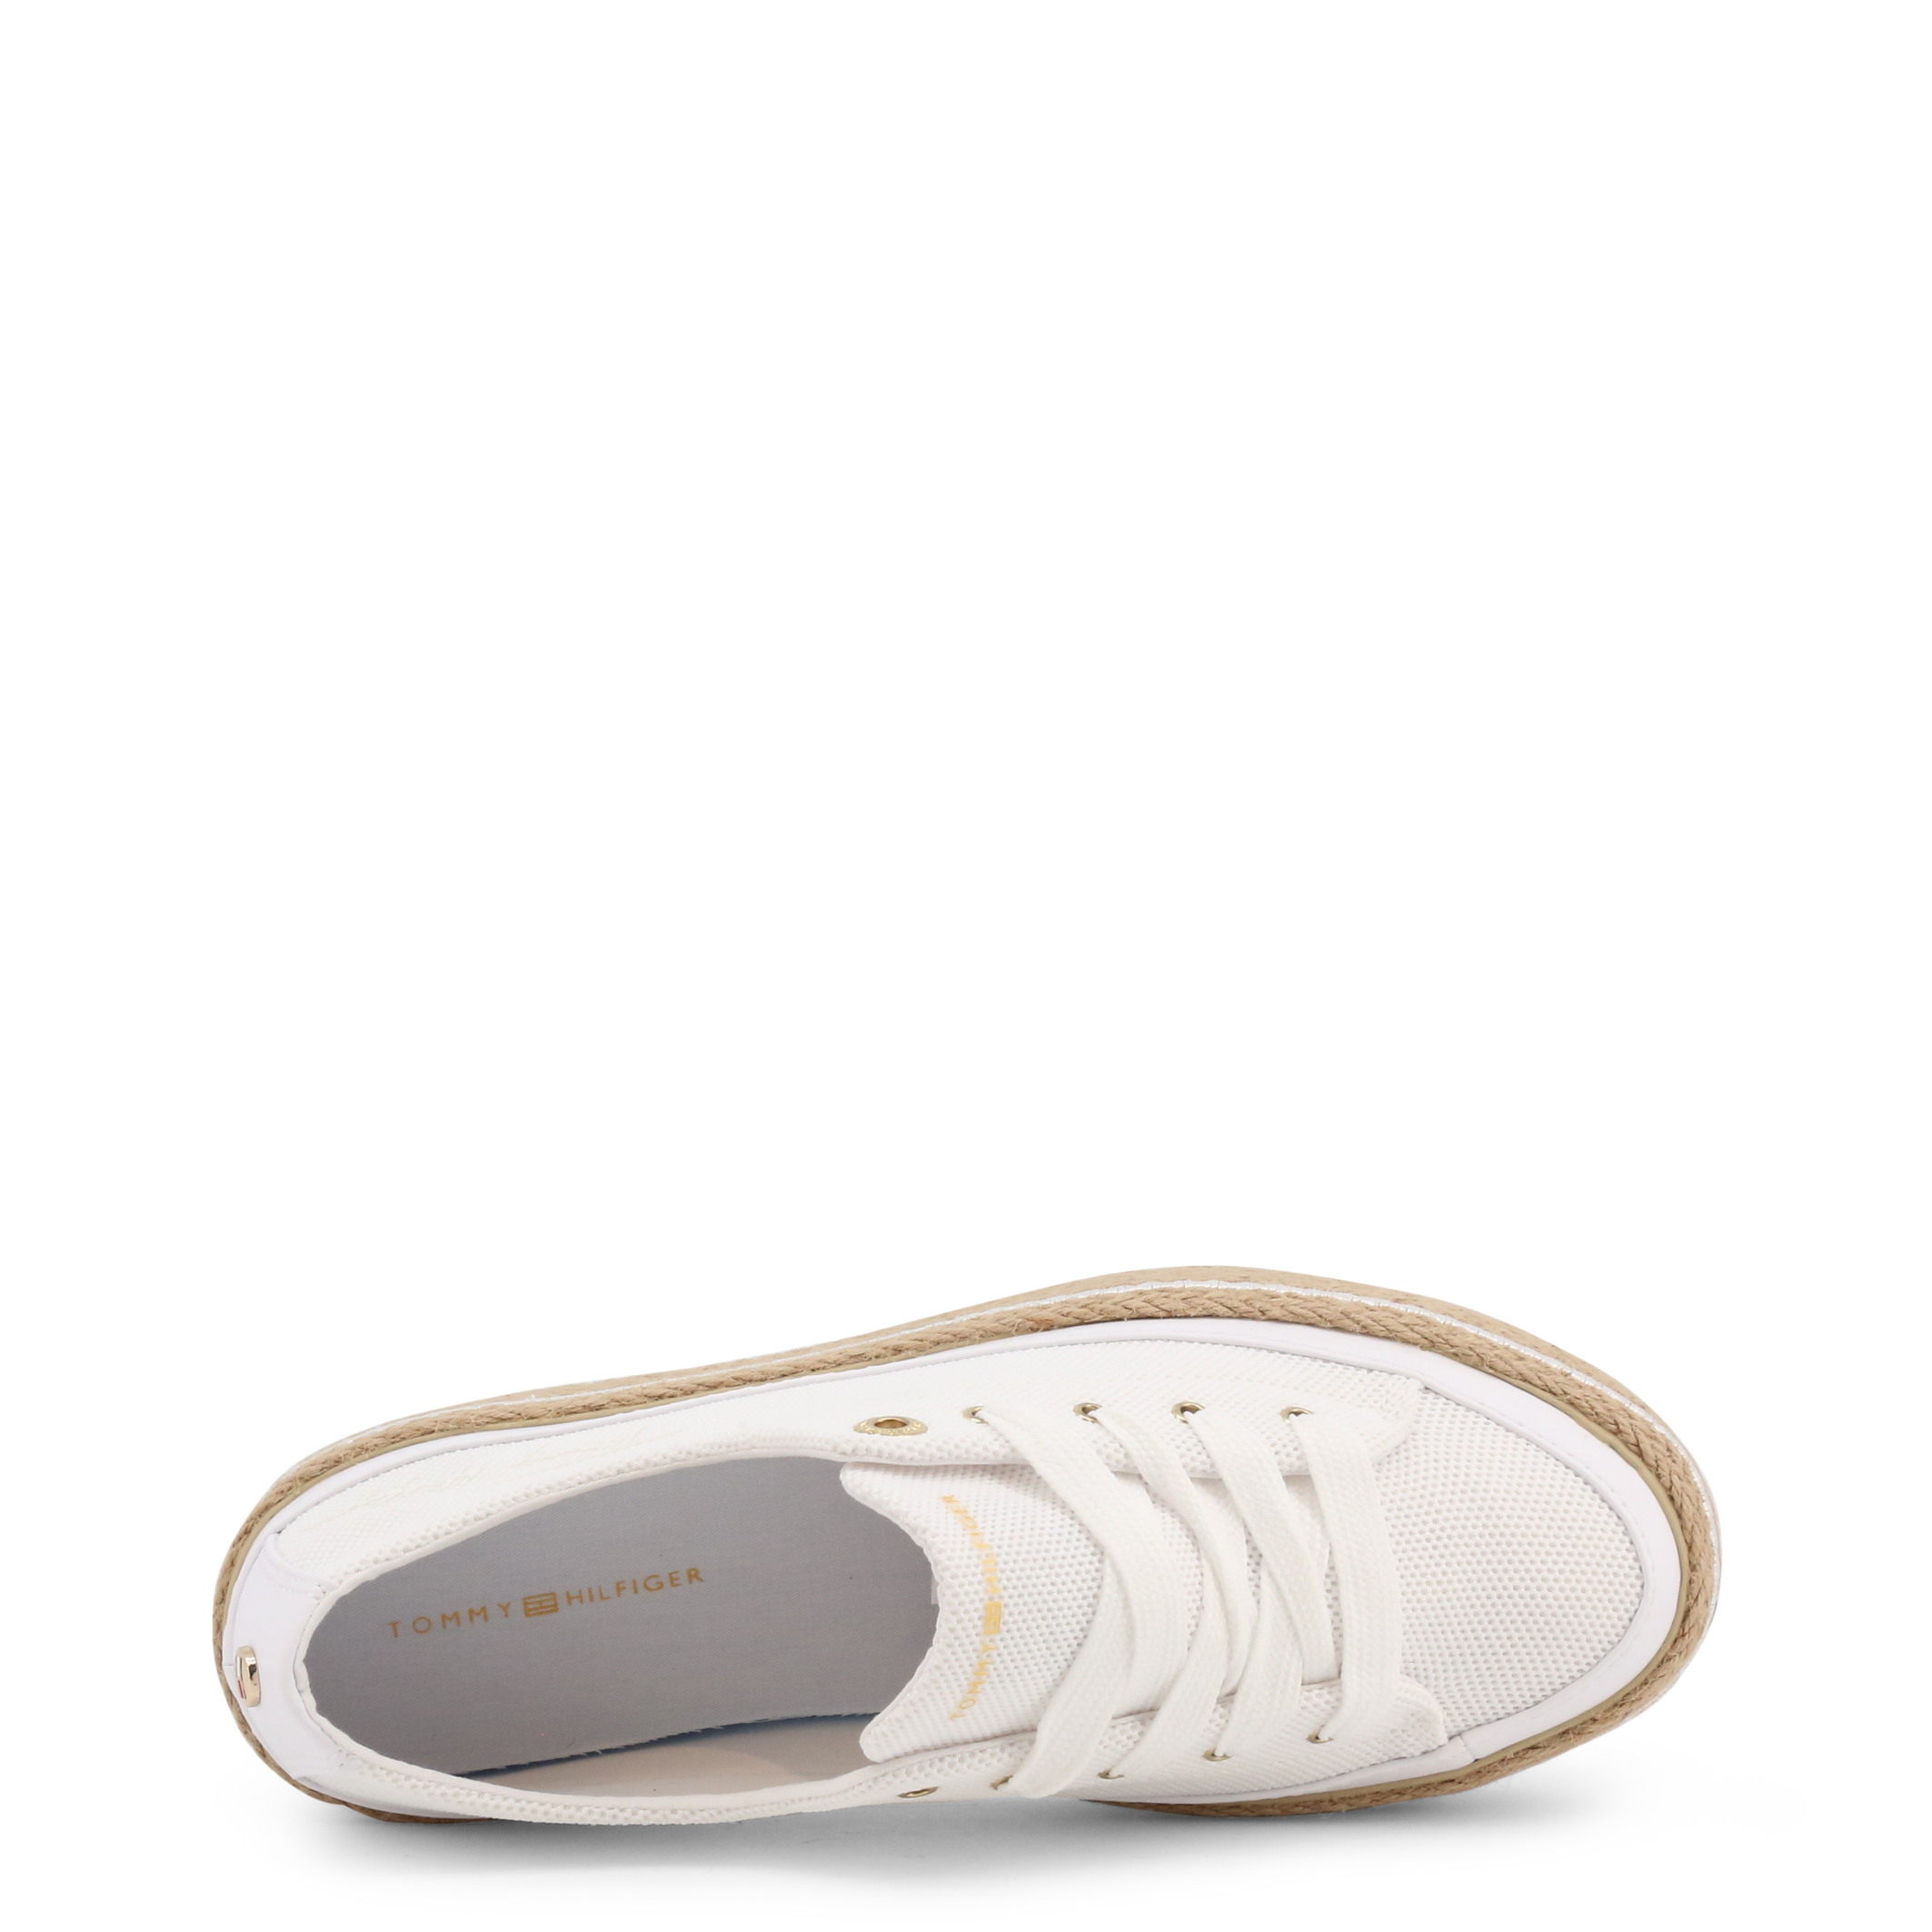 Tommy Hilfiger White Sneakers for Women - FW0FW05734